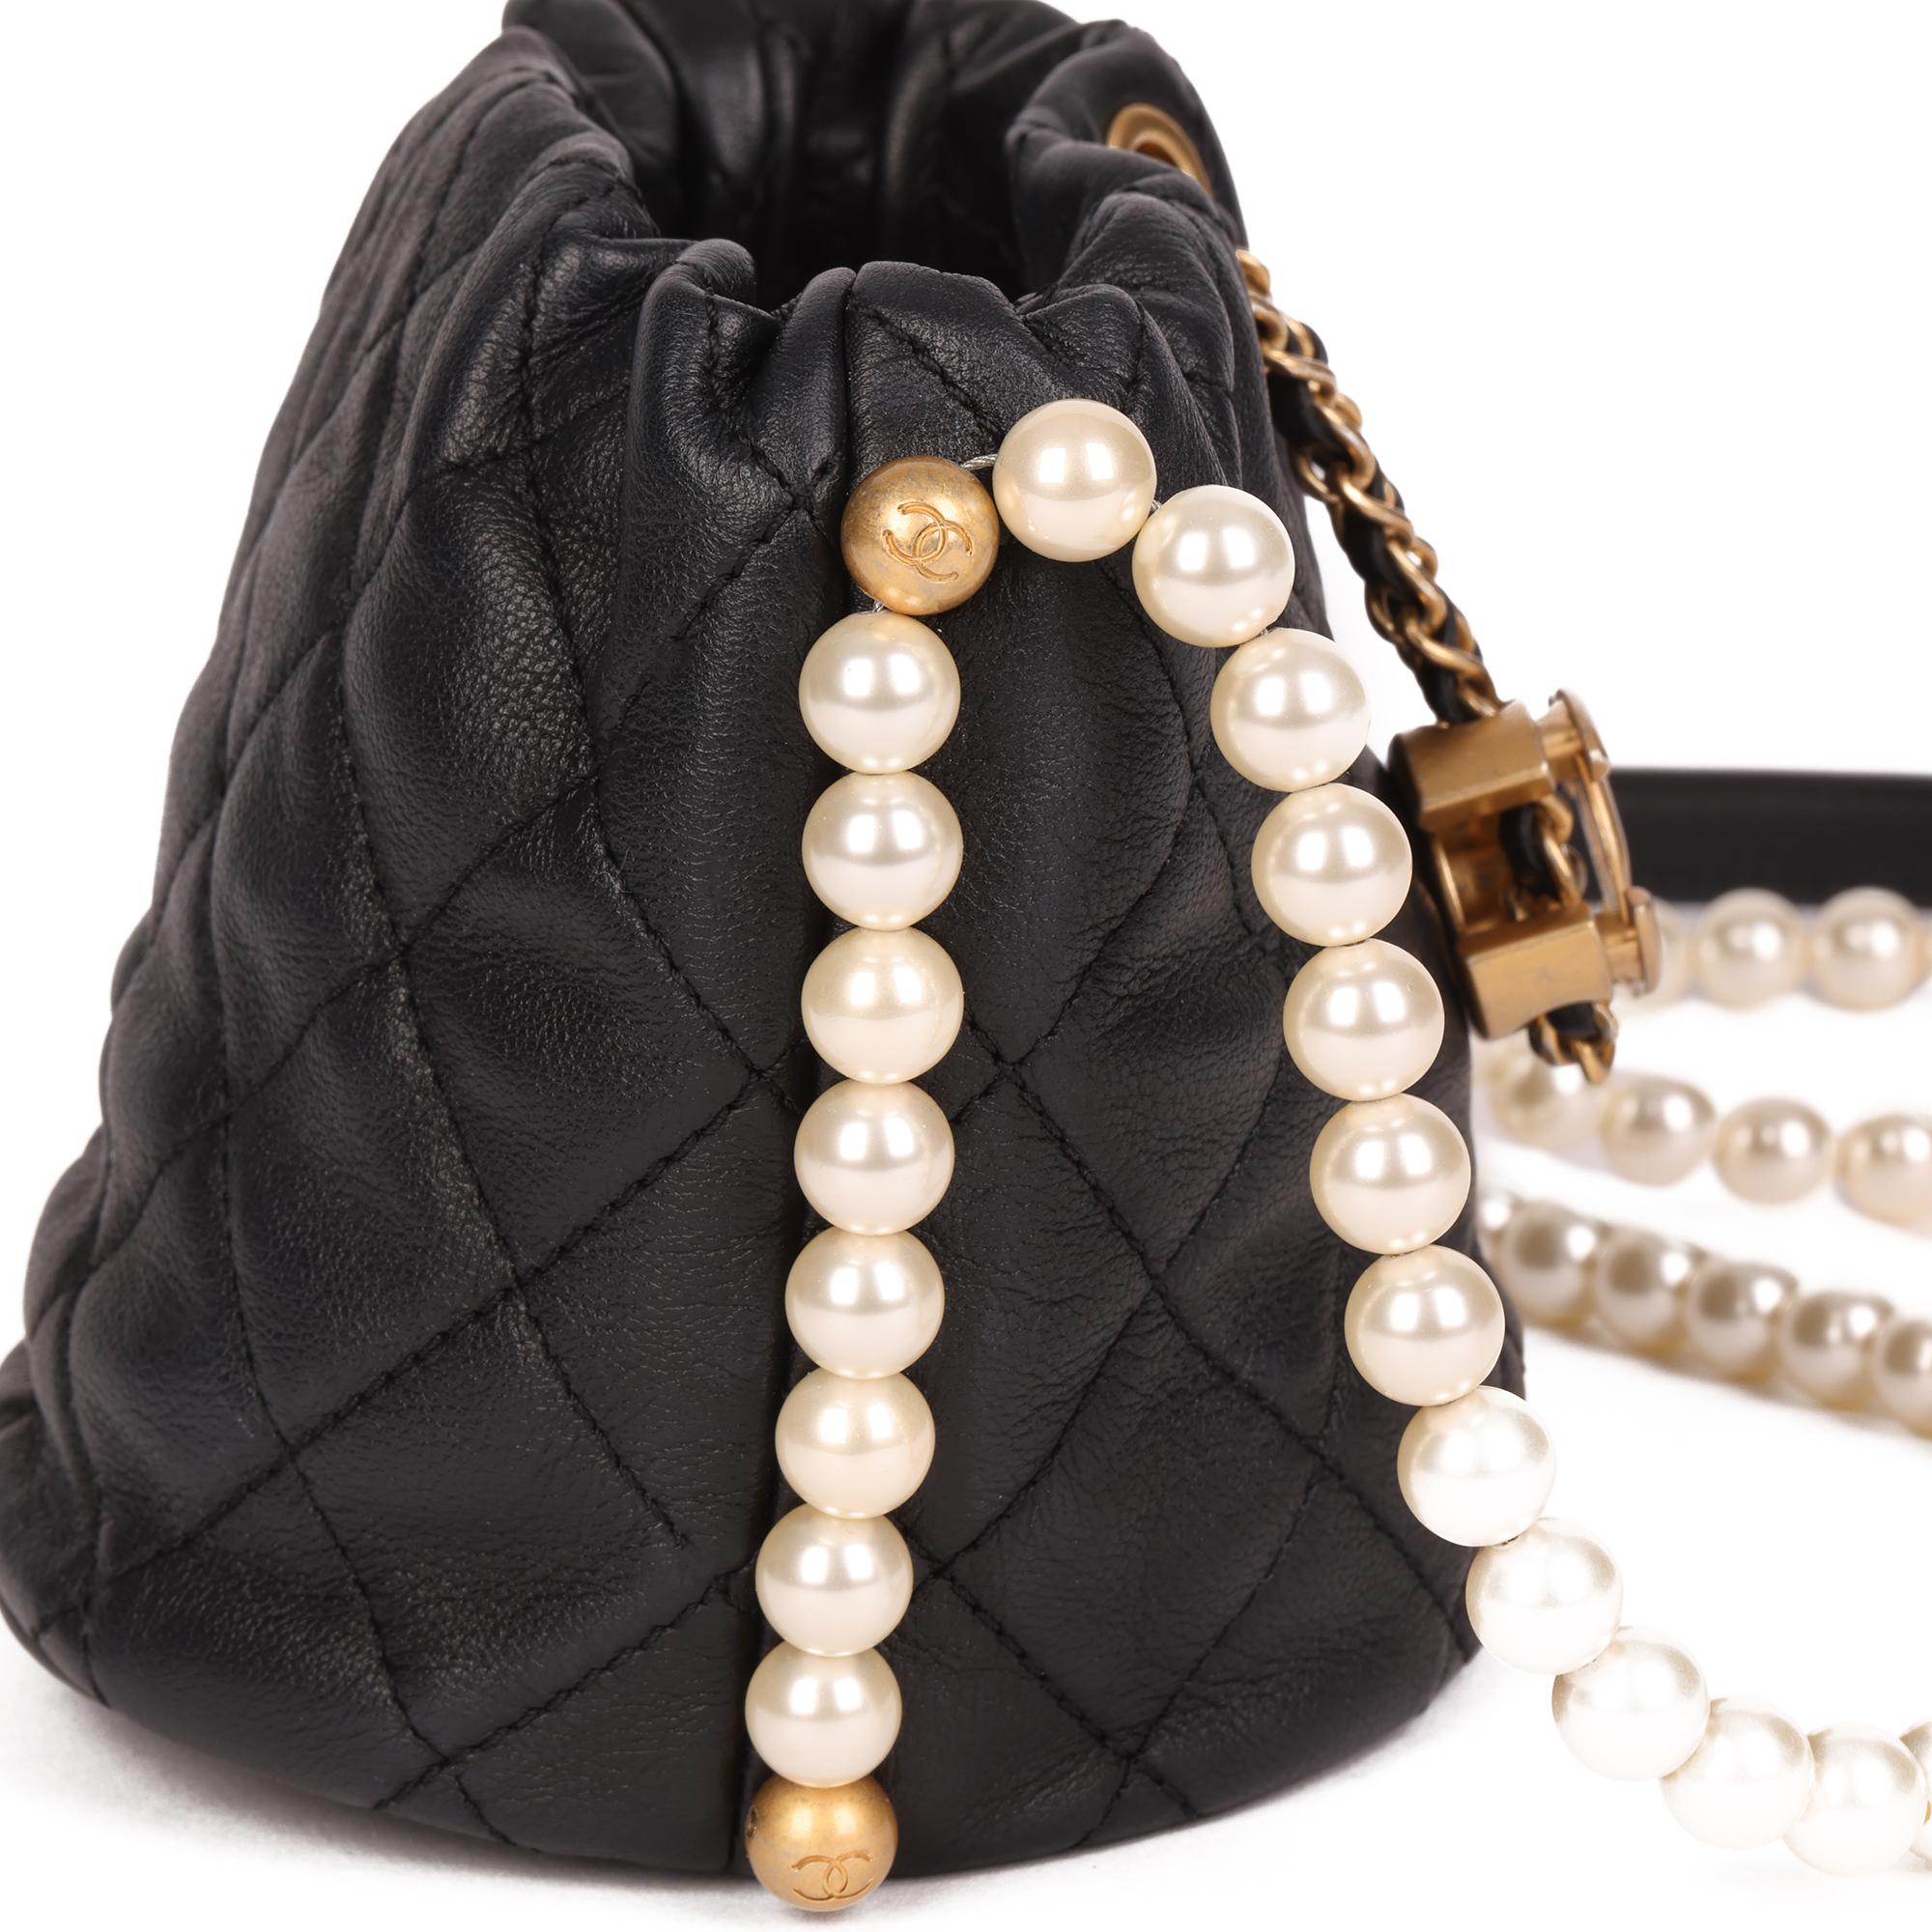 CHANEL
Black Quilted Calfskin Leather Pearl Micro Bucket Bag

Xupes Reference: HB4149
Serial Number: 31189067
Age (Circa): 2021
Accompanied By: Chanel Dust Bag, Authenticity Card
Authenticity Details: Authenticity Card, Serial Sticker (Made in